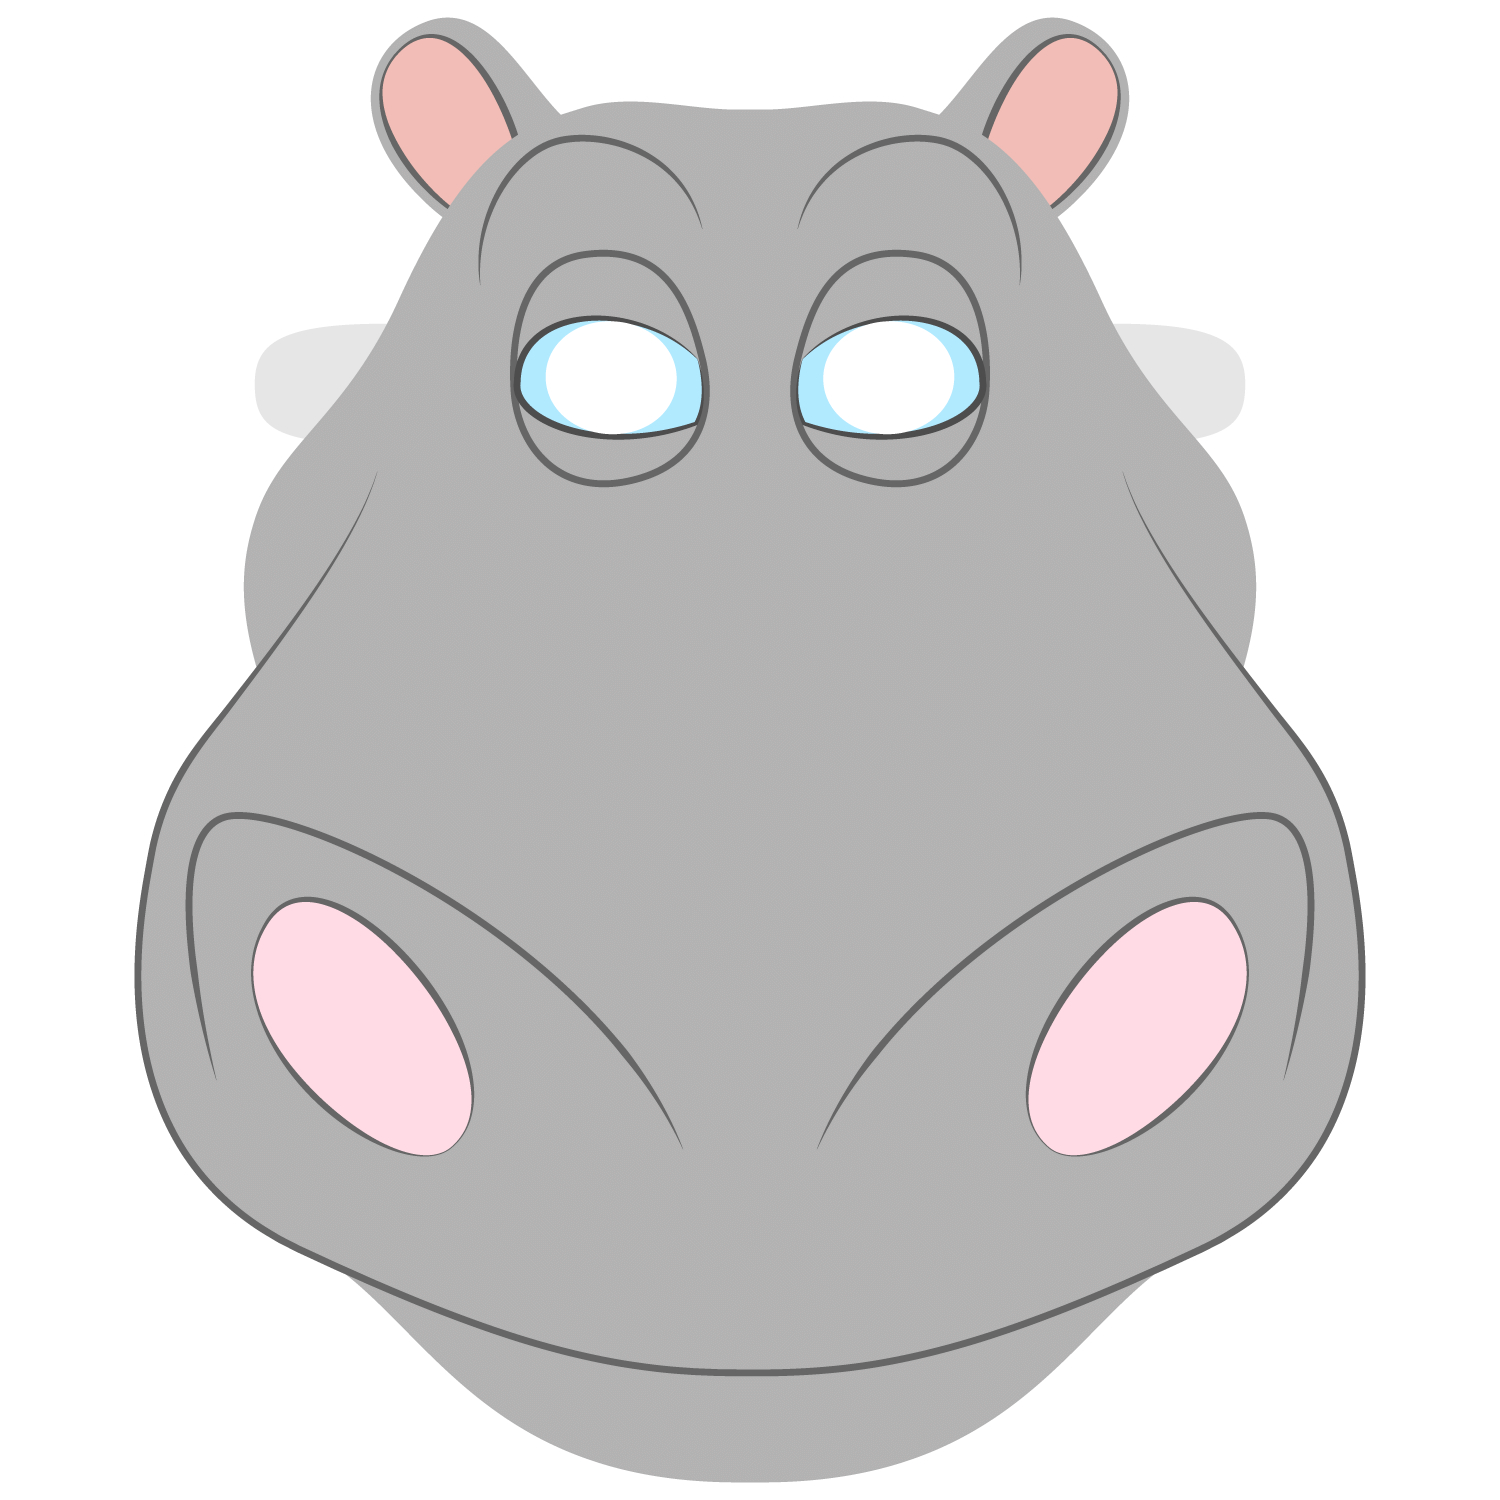 Hippo Mask Template | Free Printable Papercraft Templates - Free Printable Hippo Mask